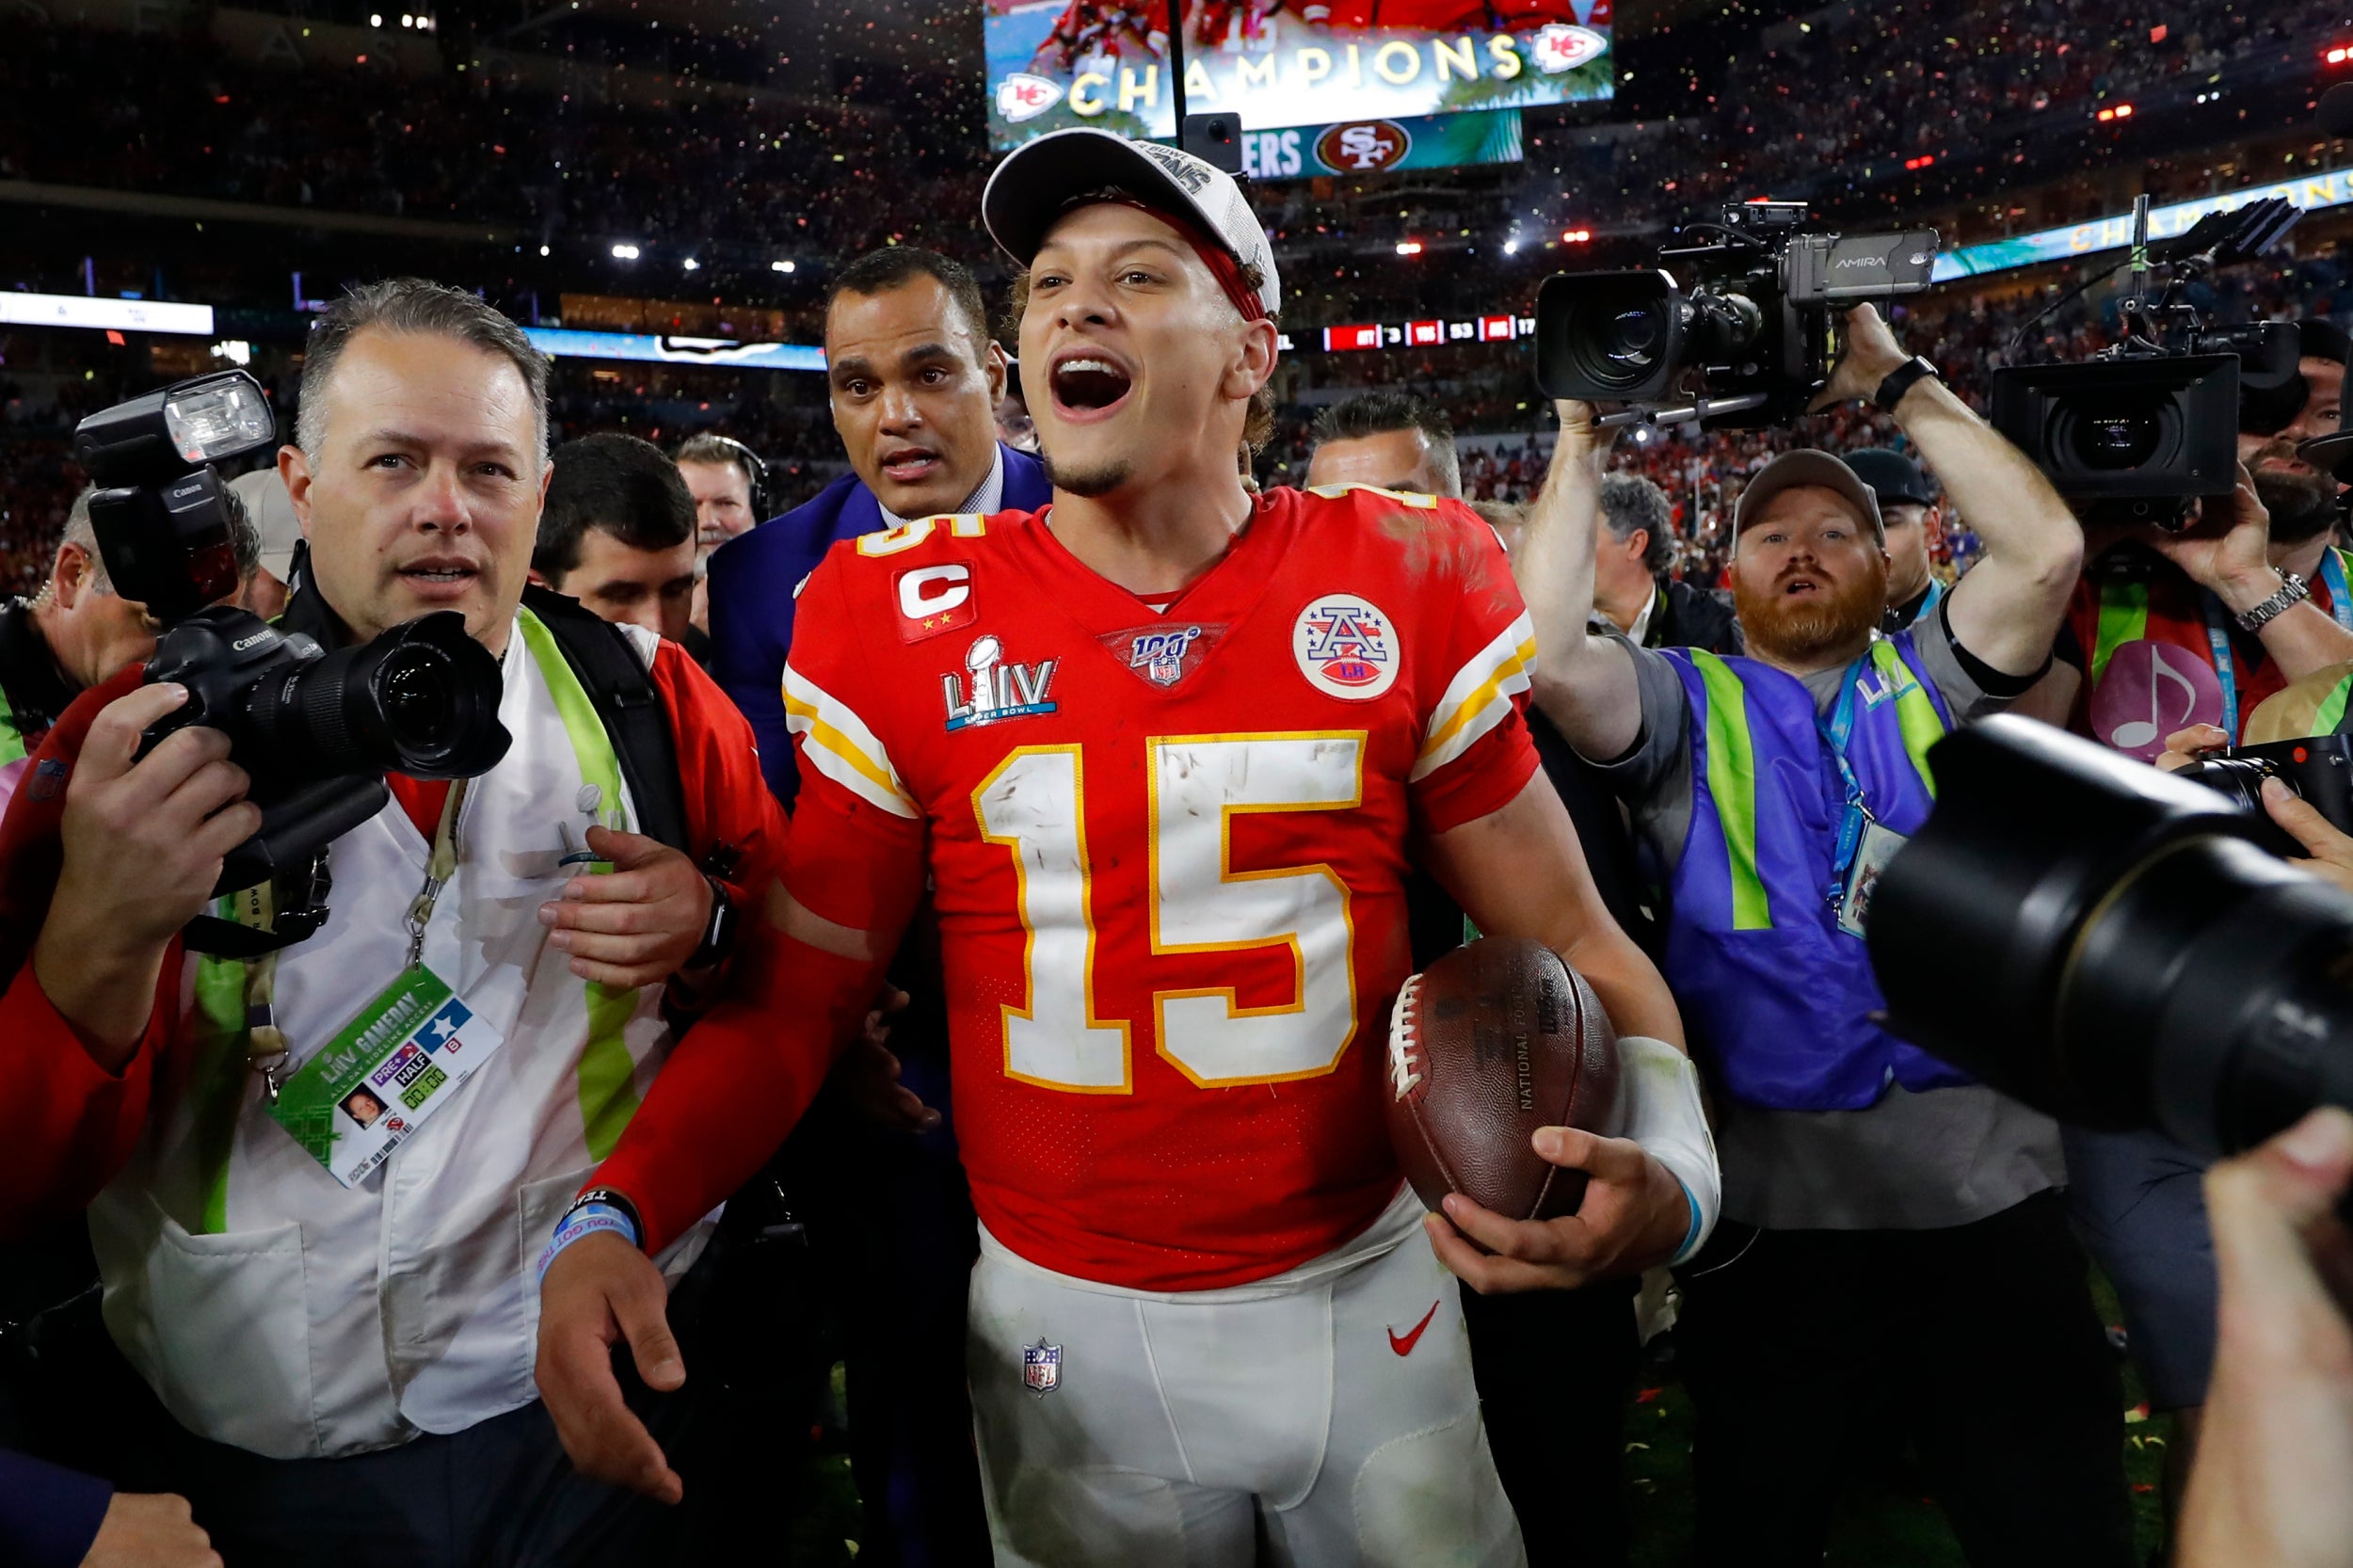 Mahomes celebrates after winning the Super Bowl (Getty)